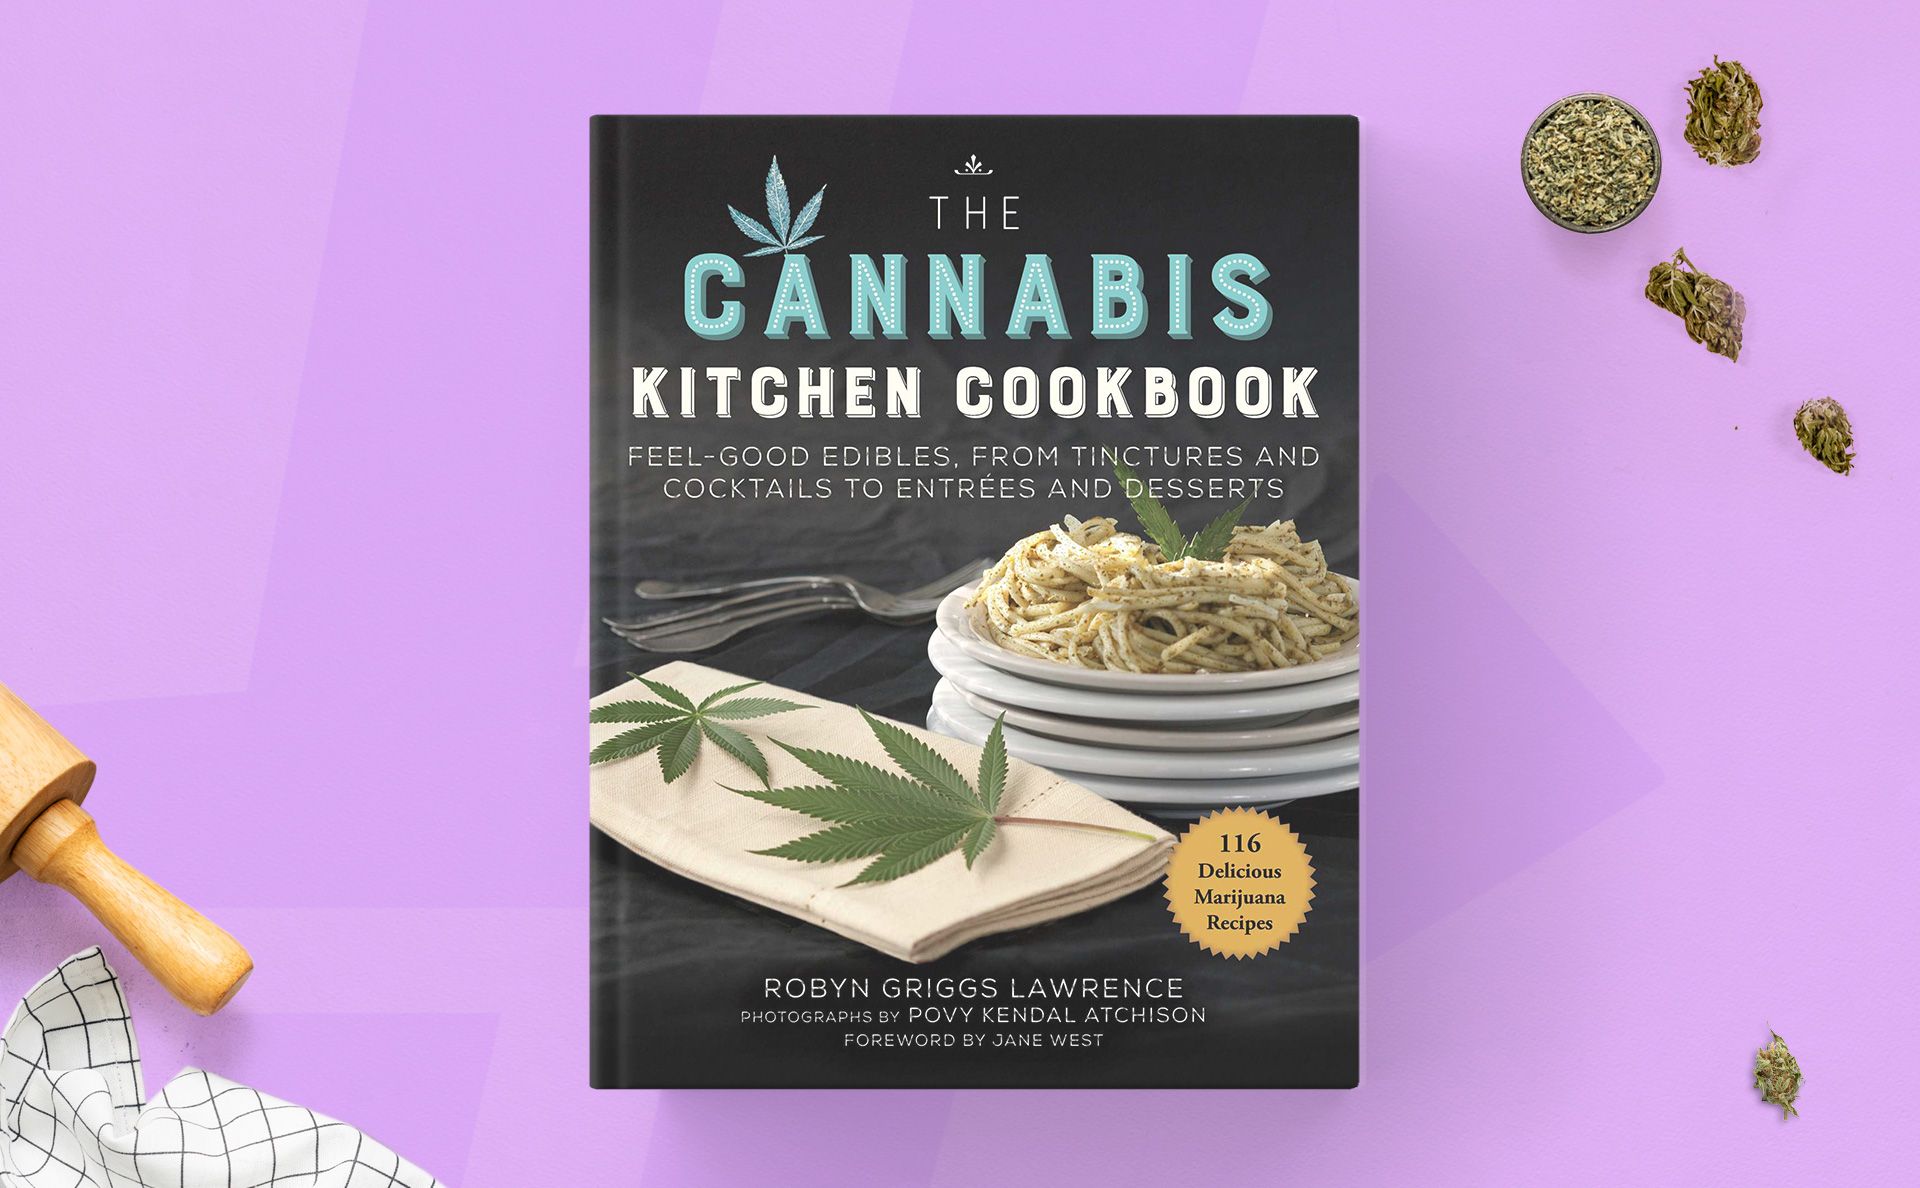 The Cannabis Kitchen Cookbook by Robin Griggs Lawrence.jpg